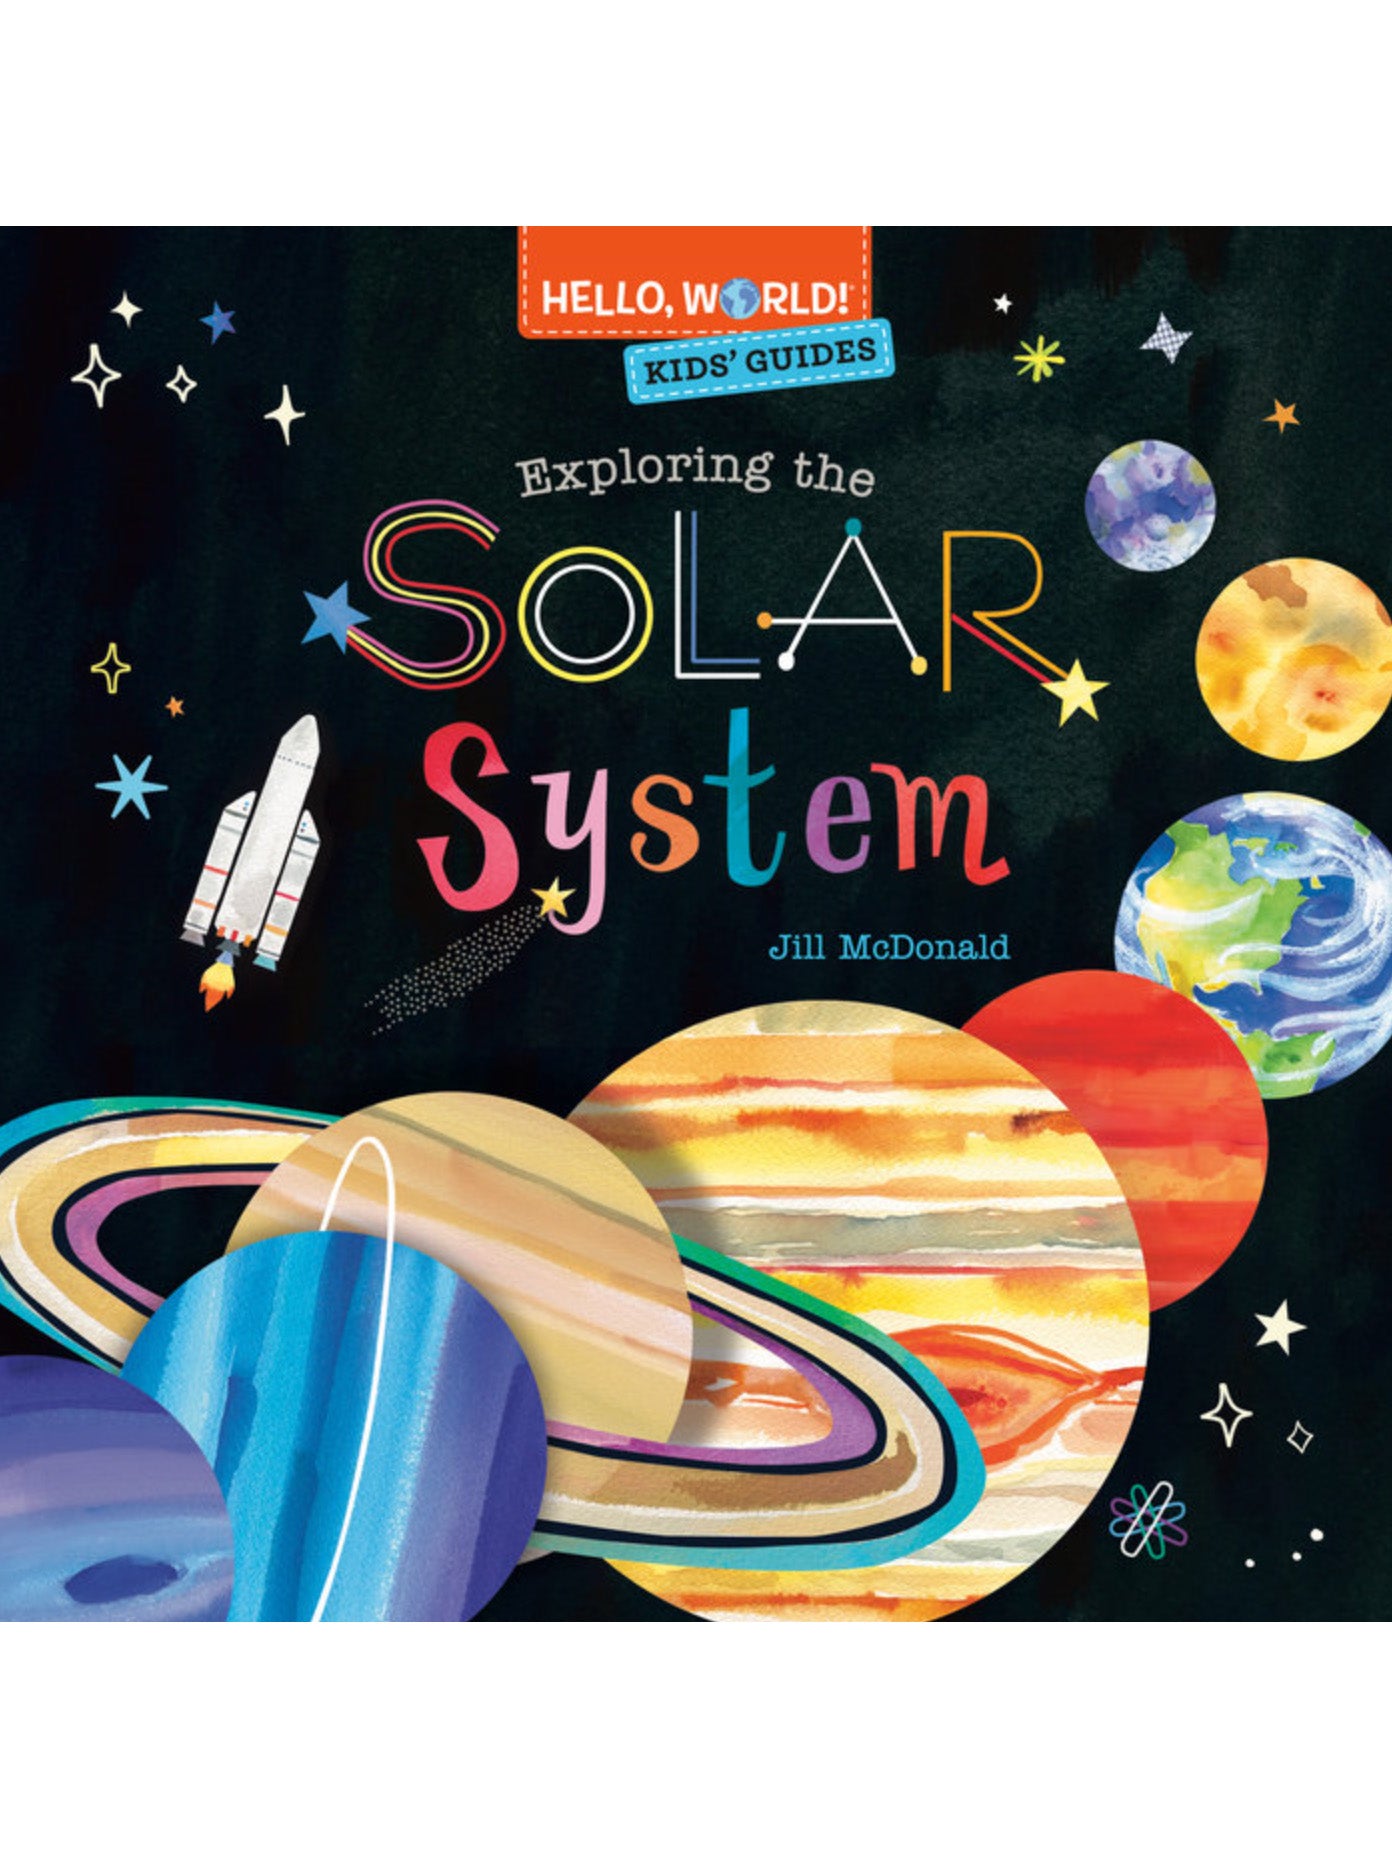 hello world! kids' guides: exploring the solar system